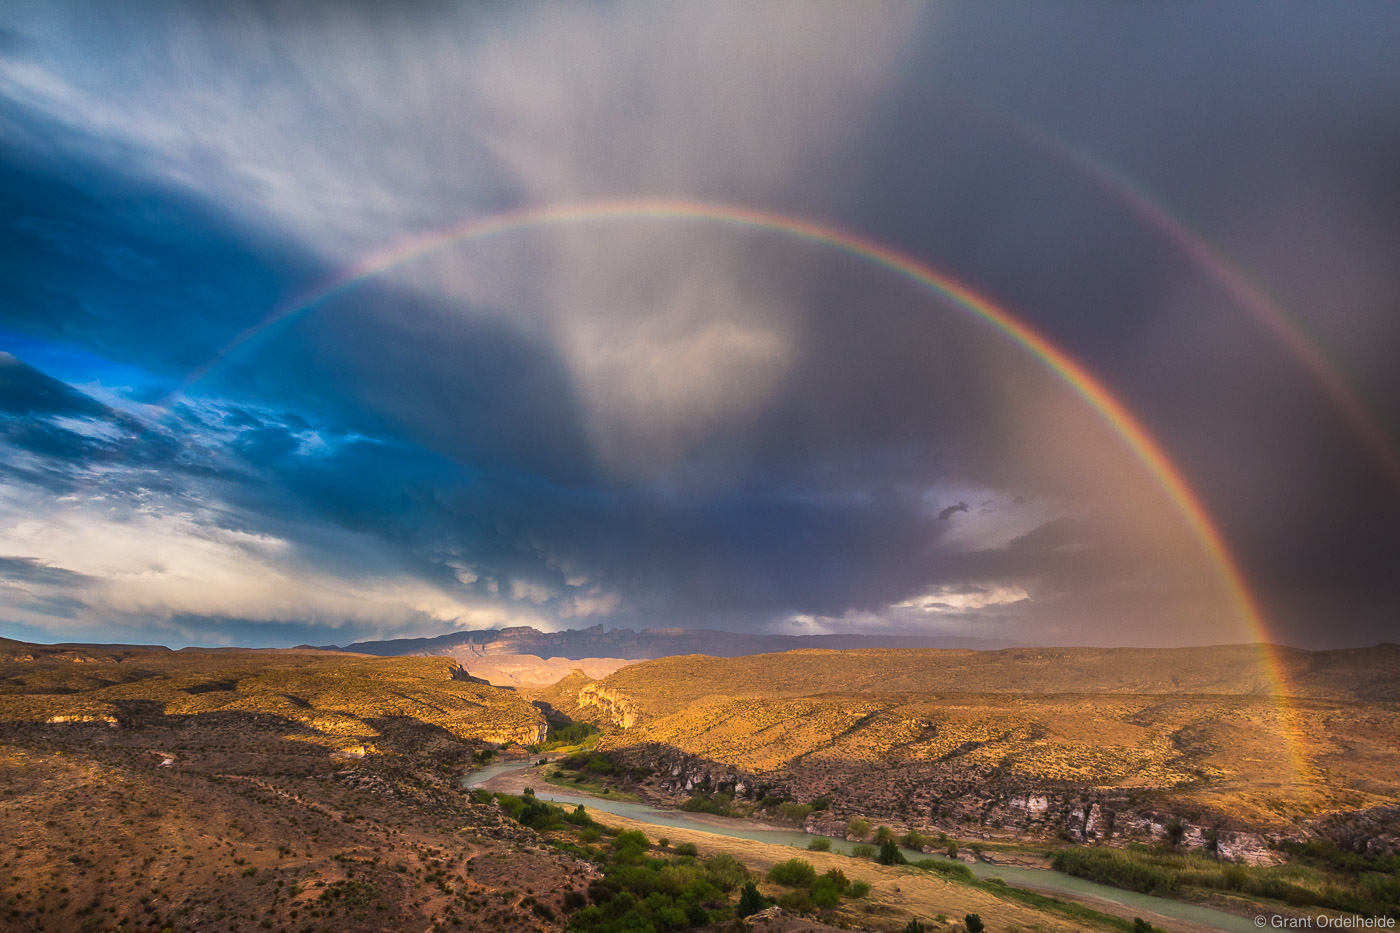 A full rainbow over the Rio Grande river, which serves as the USA/Mexico border, and the Sierra del Carmen Mountains viewed from...